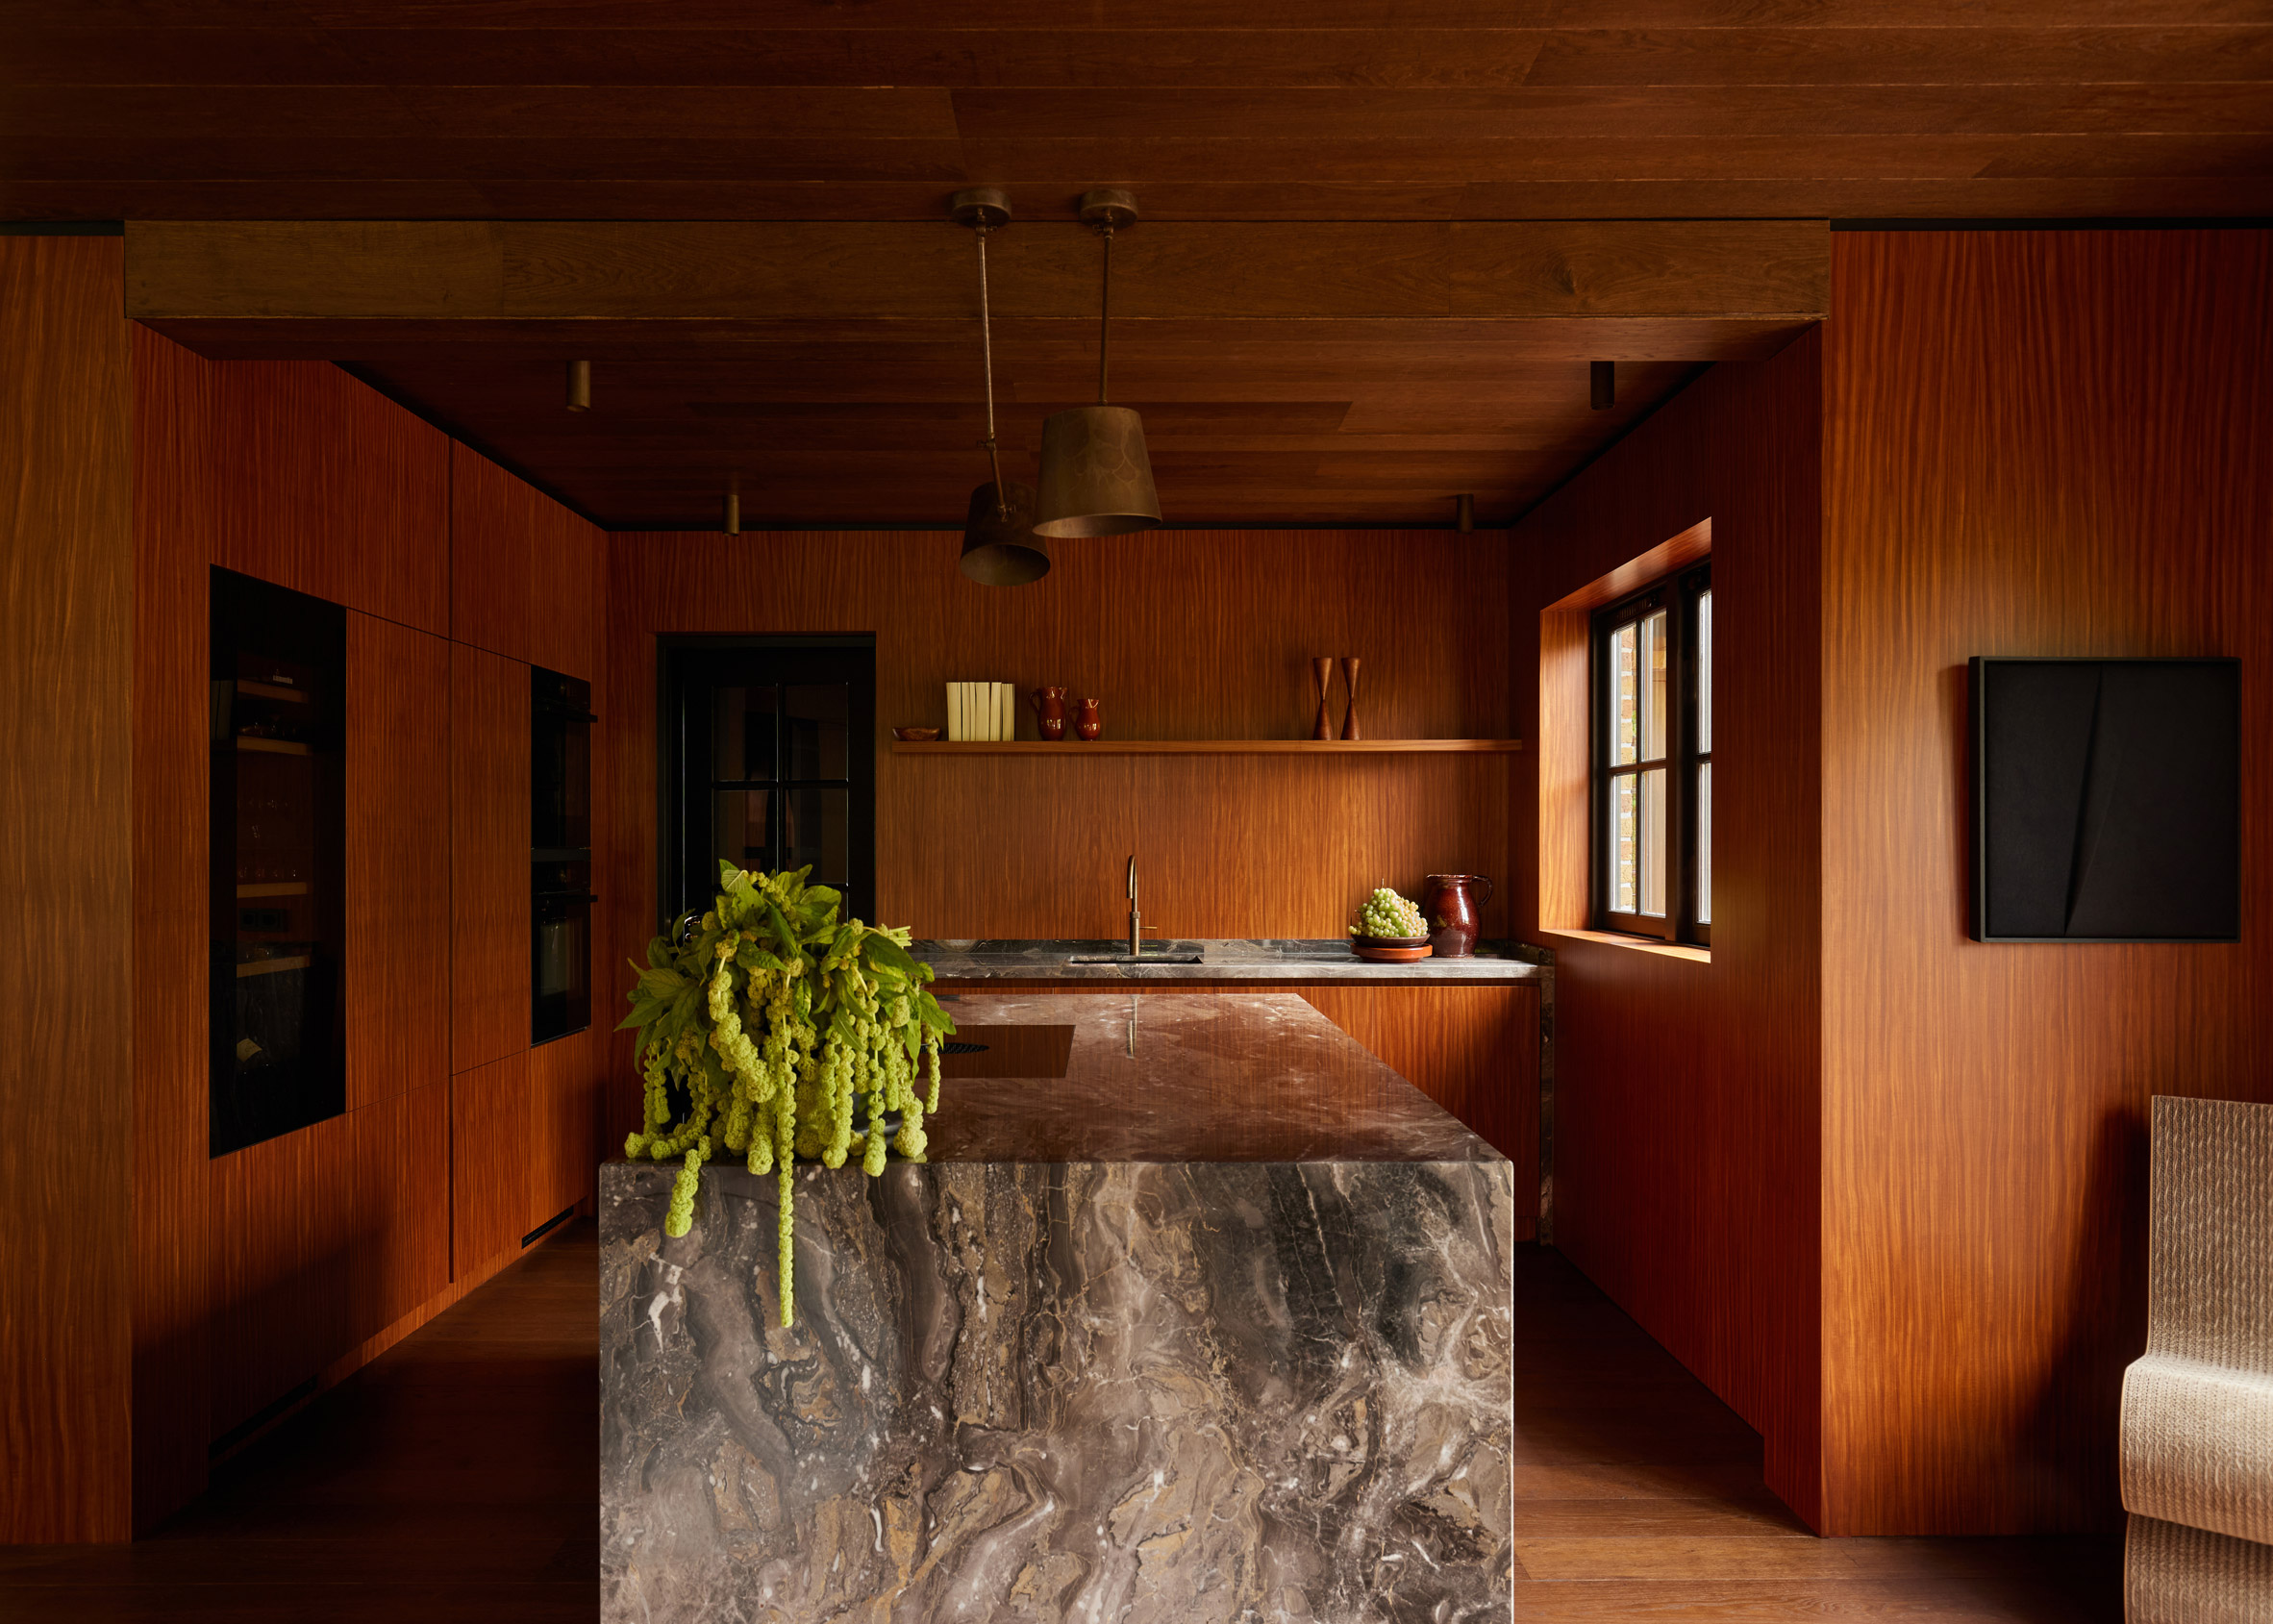 Wood-lined kitchen interior with a marble island by DAB Studio